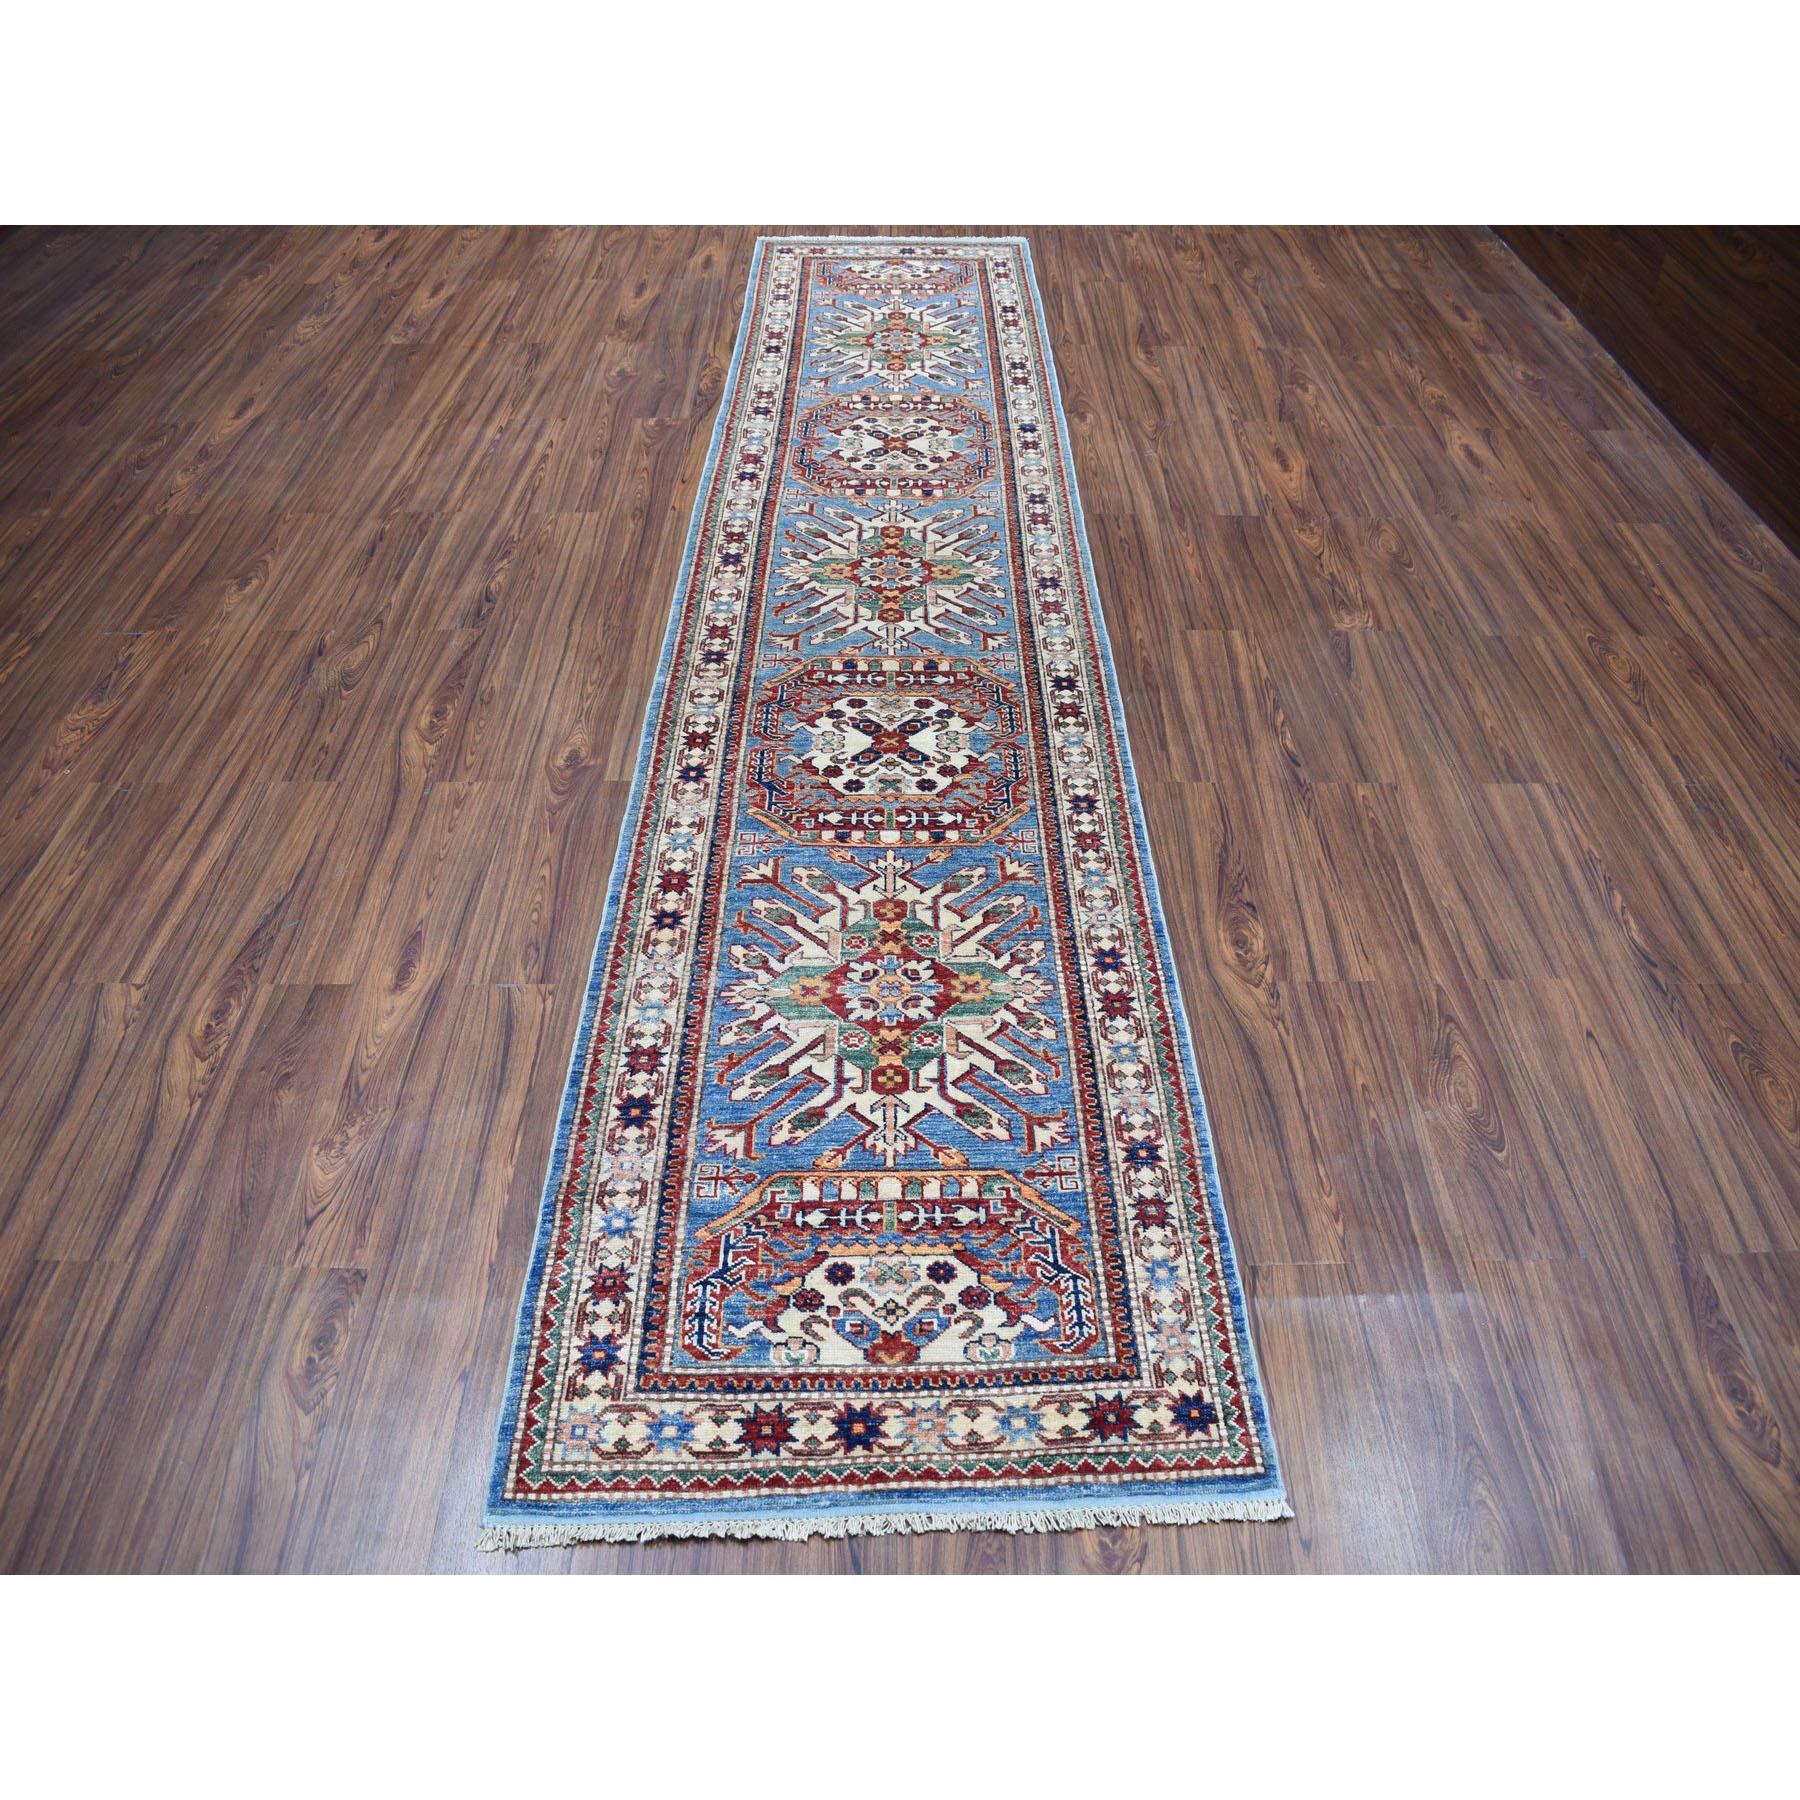 This is a truly genuine one-of-a-kind blue geometric super Kazak handmade runner oriental rug. It has been knotted for months and months in the centuries-old Persian weaving craftsmanship techniques by expert artisans. Measures: 2'10